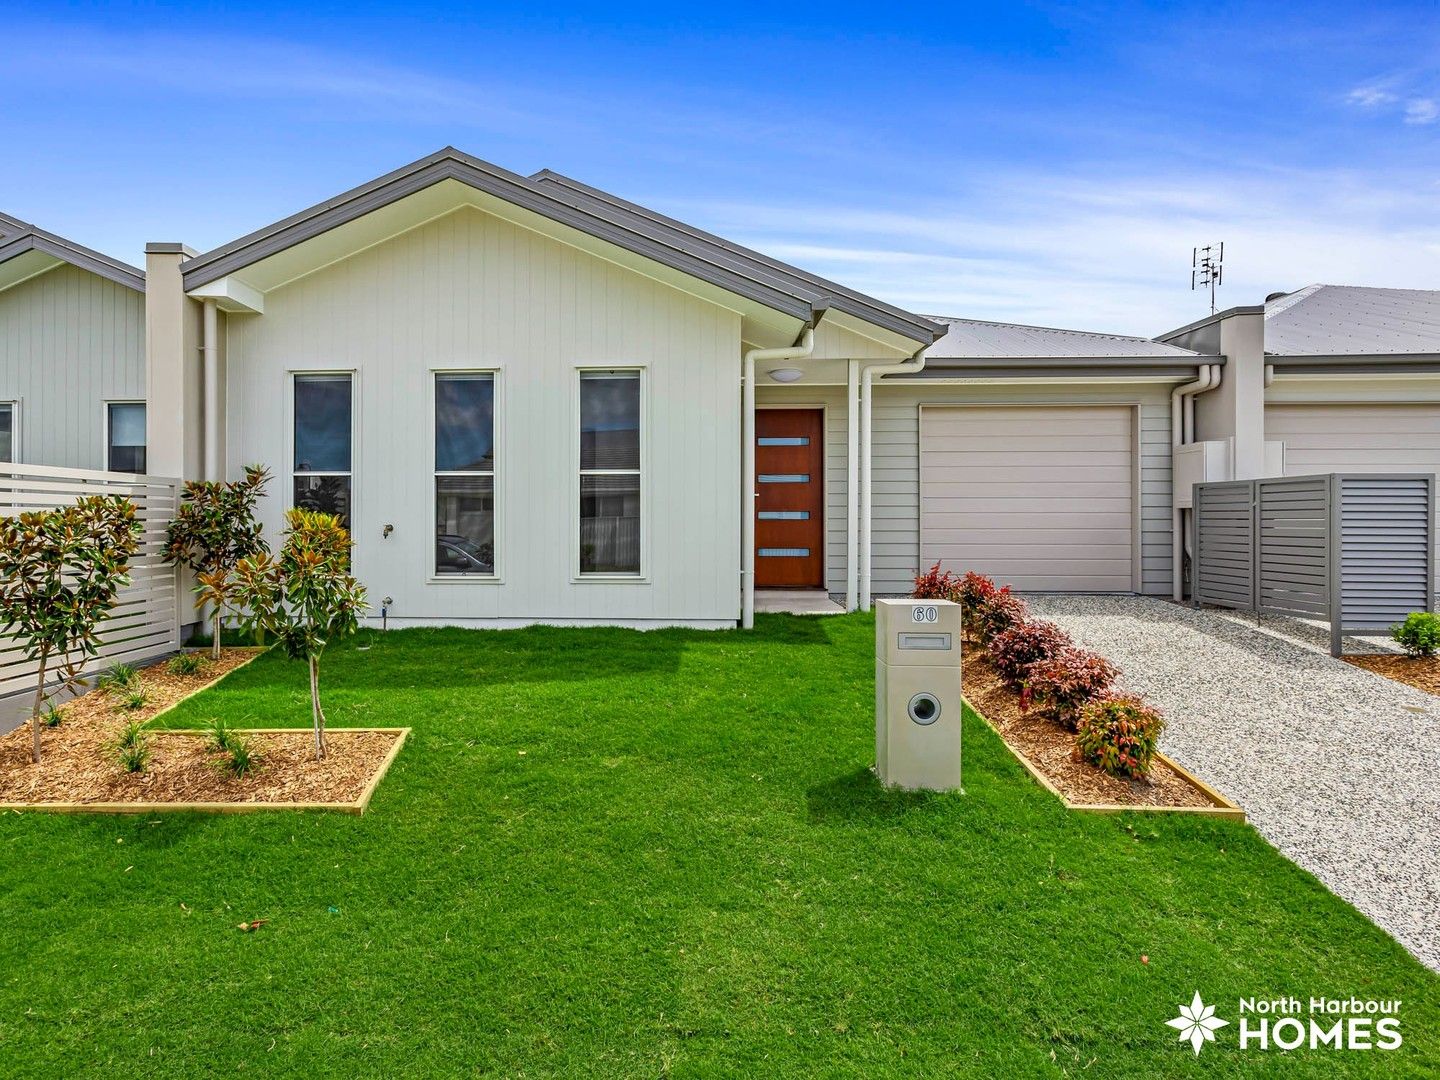 3 bedrooms Villa in 60 Noble St BURPENGARY EAST QLD, 4505